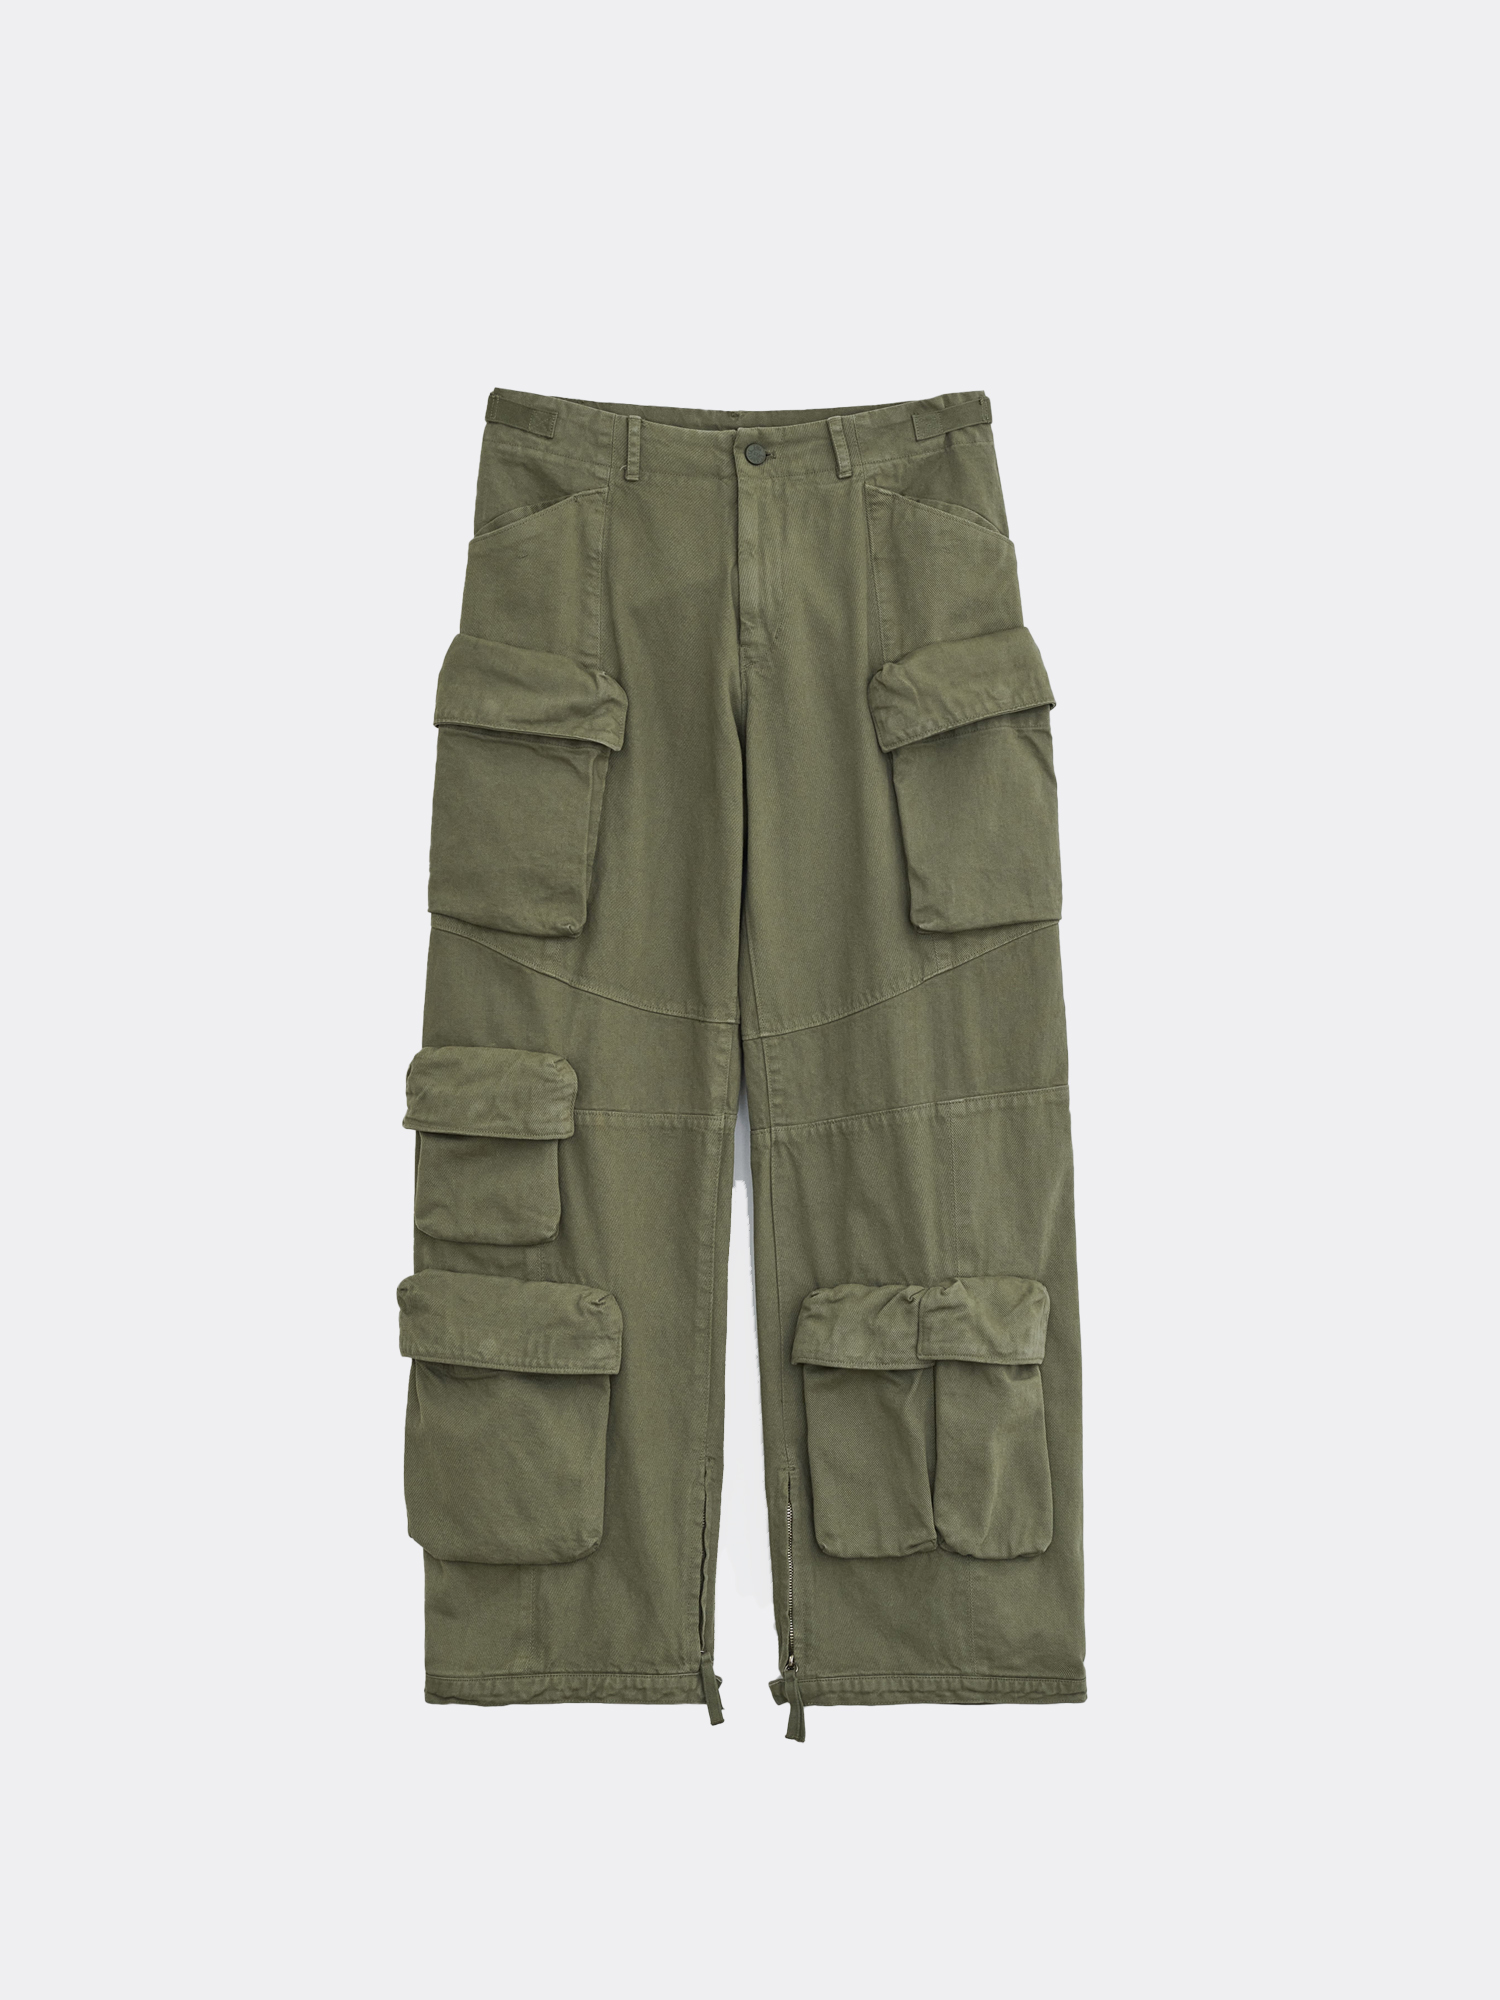 EE GARMENTS DYED UTILITY CARGO PANTS-OLIVE